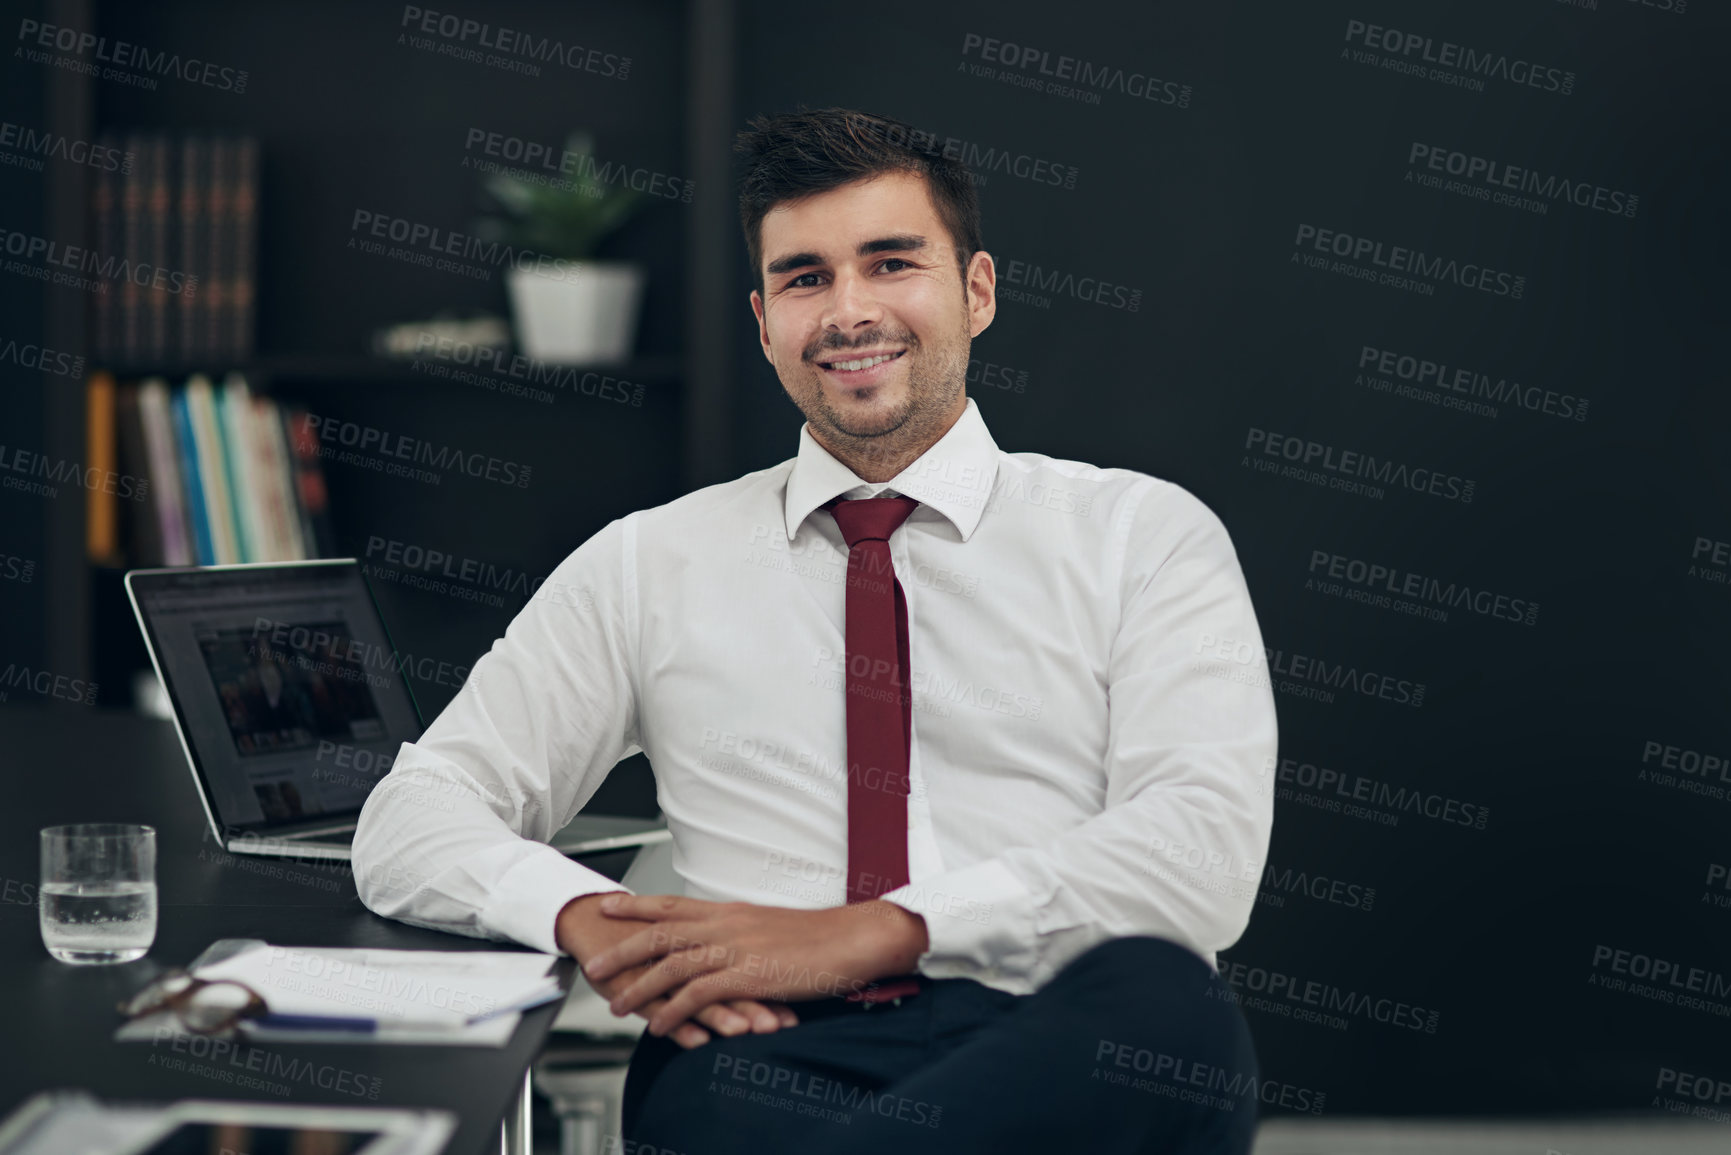 Buy stock photo Cropped portrait of a young businessman sitting in his office